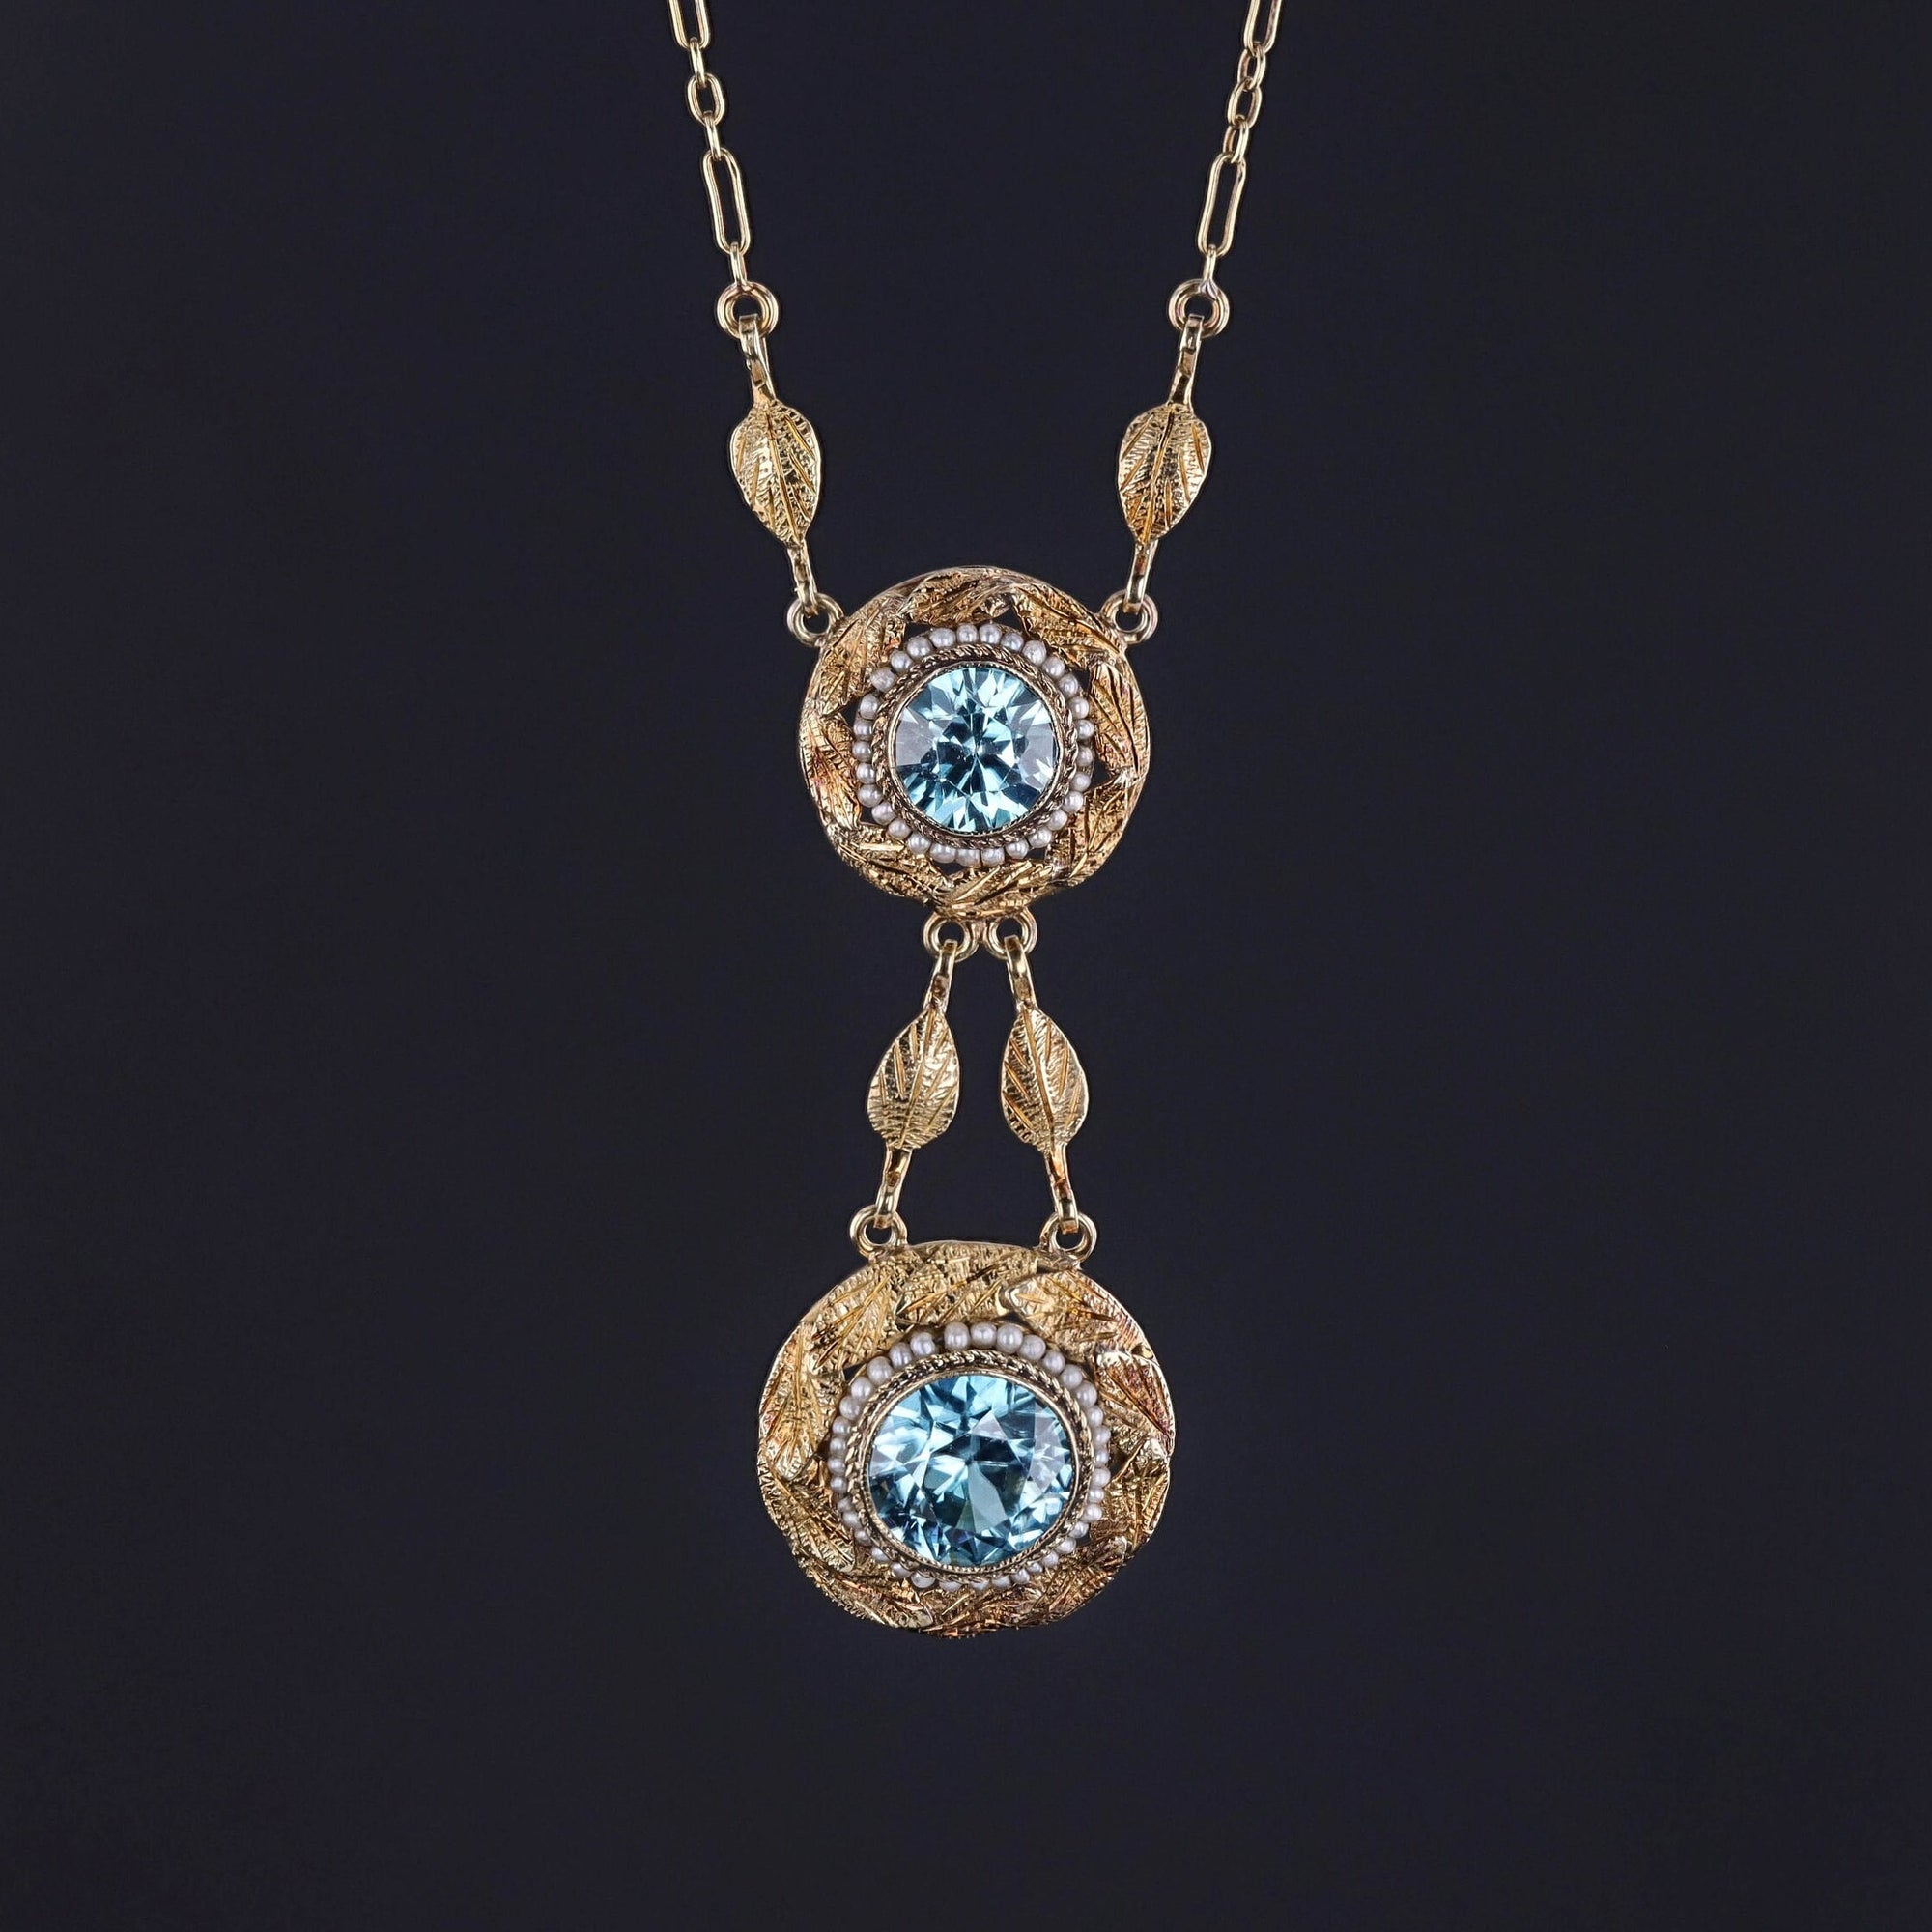 A dazzling Victorian necklace with sparkling blue zircon in frames of tiny pearls and 14k leaves.